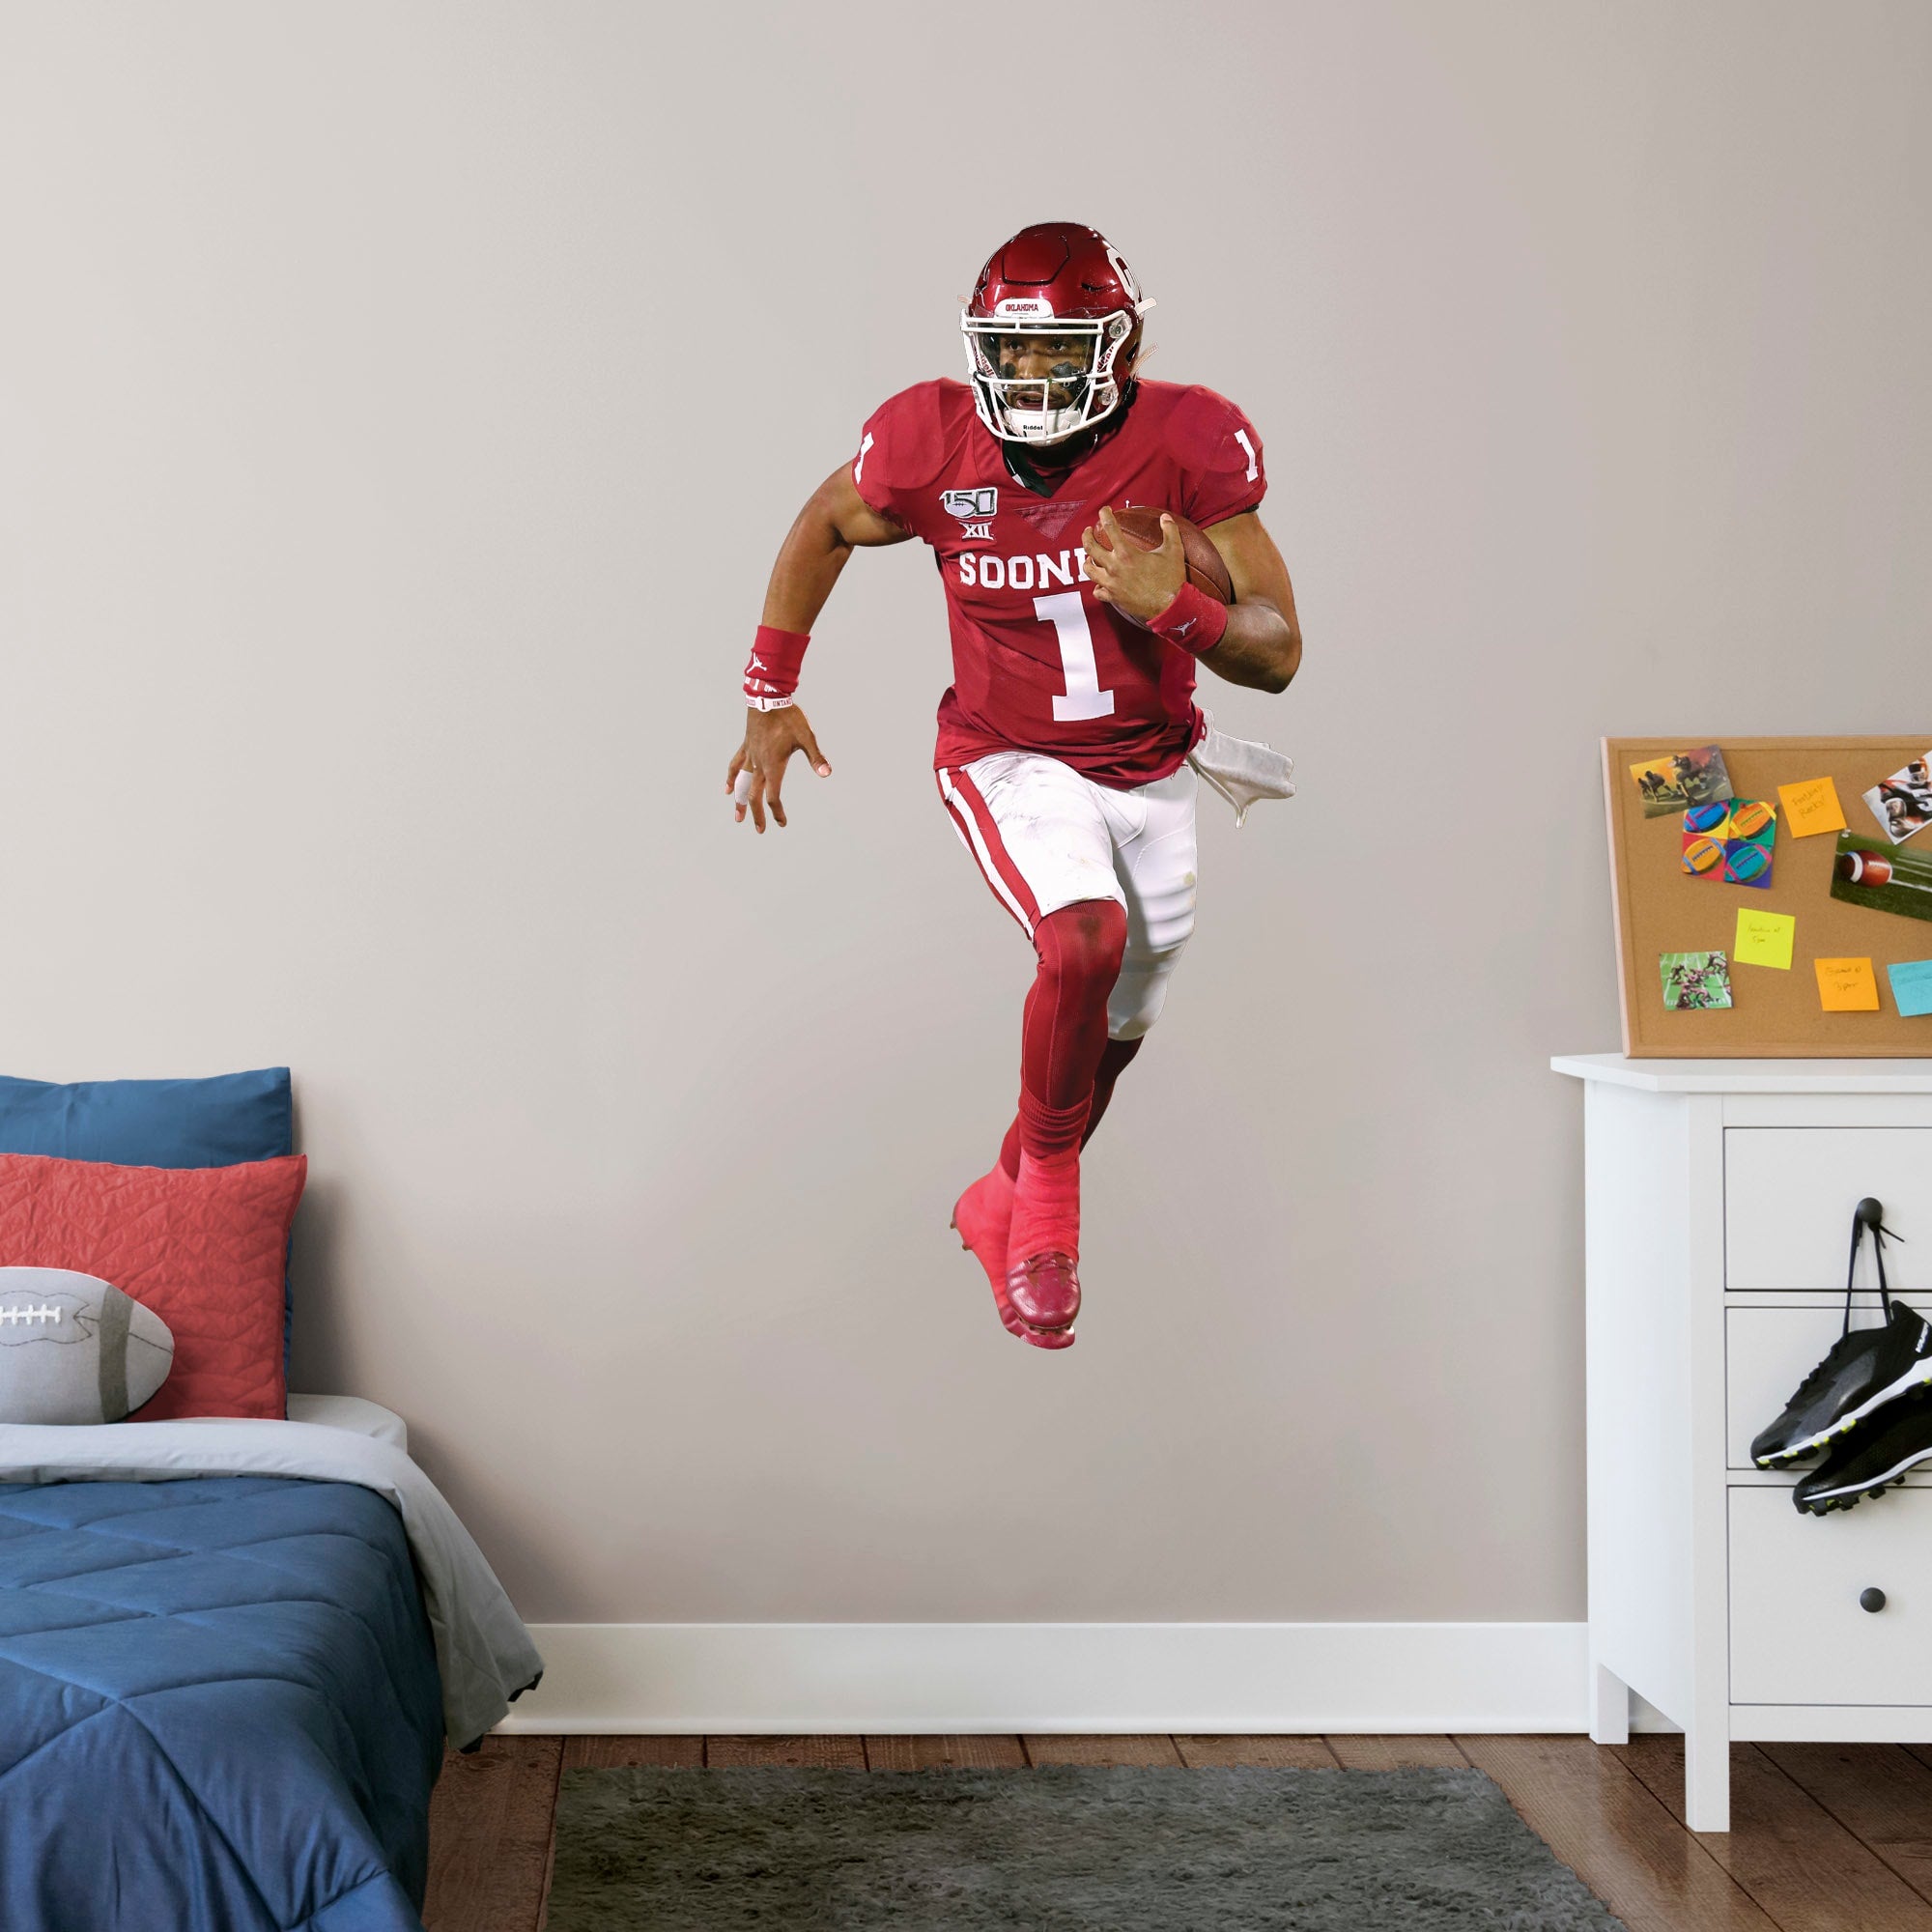 Jalen Hurts for Oklahoma Sooners: Oklahoma - Officially Licensed Removable Wall Decal Giant Athlete + 2 Decals (26"W x 51"H) by